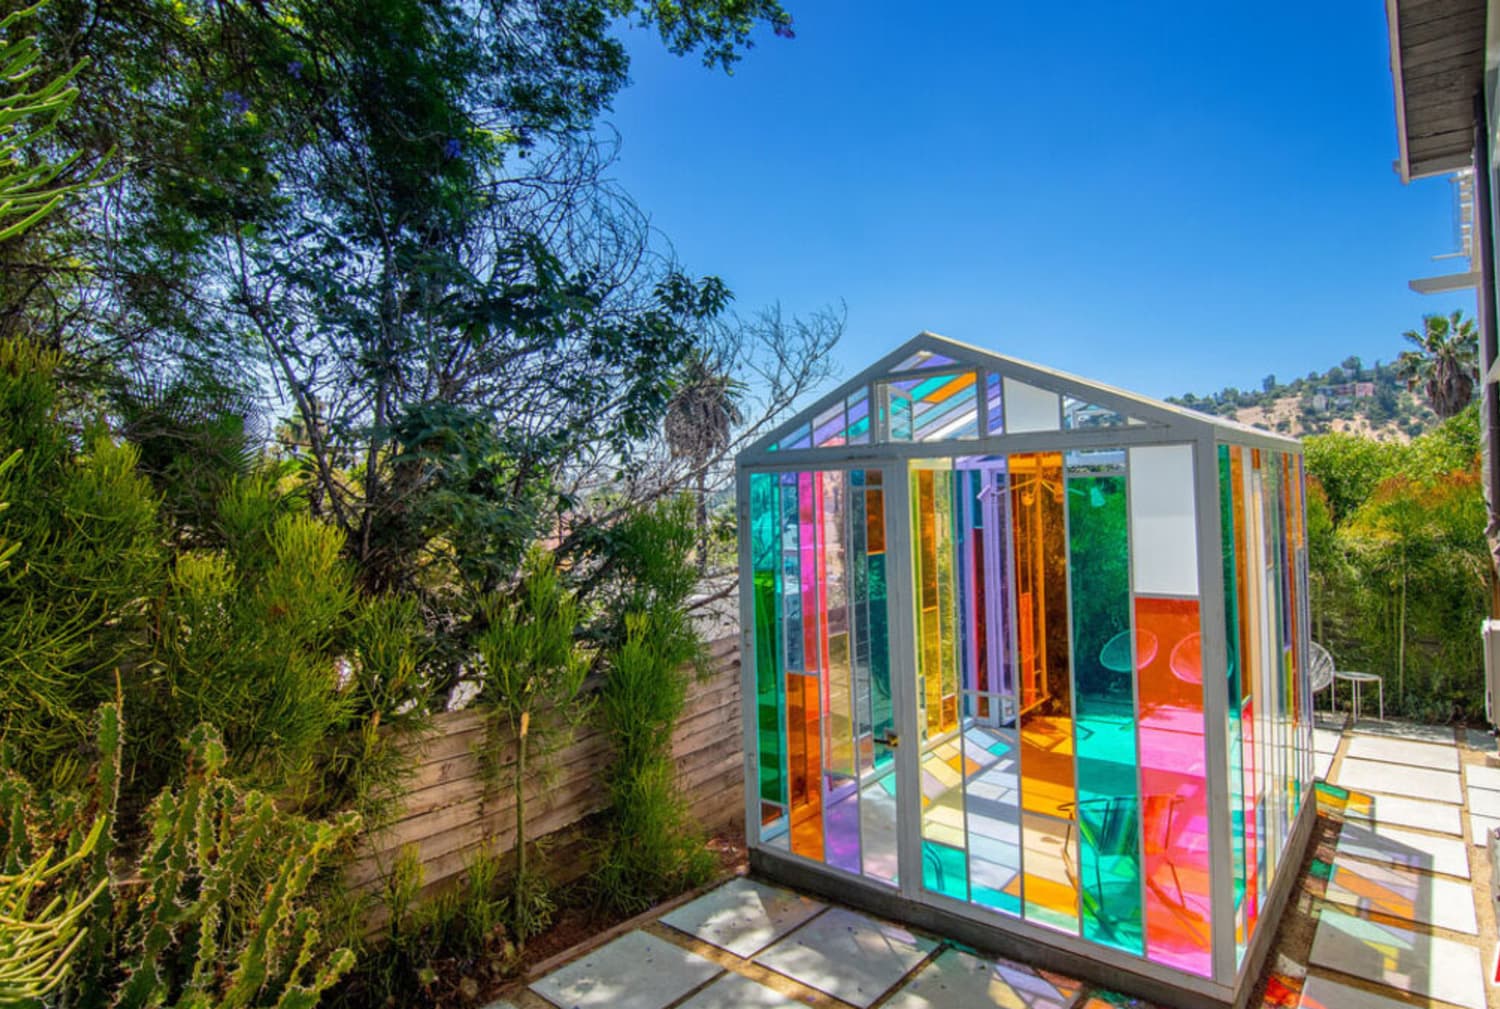 Feast Your Eyes on This Sunny Single-Family for Sale in Los Angeles — That Comes with a “Chromacabana”